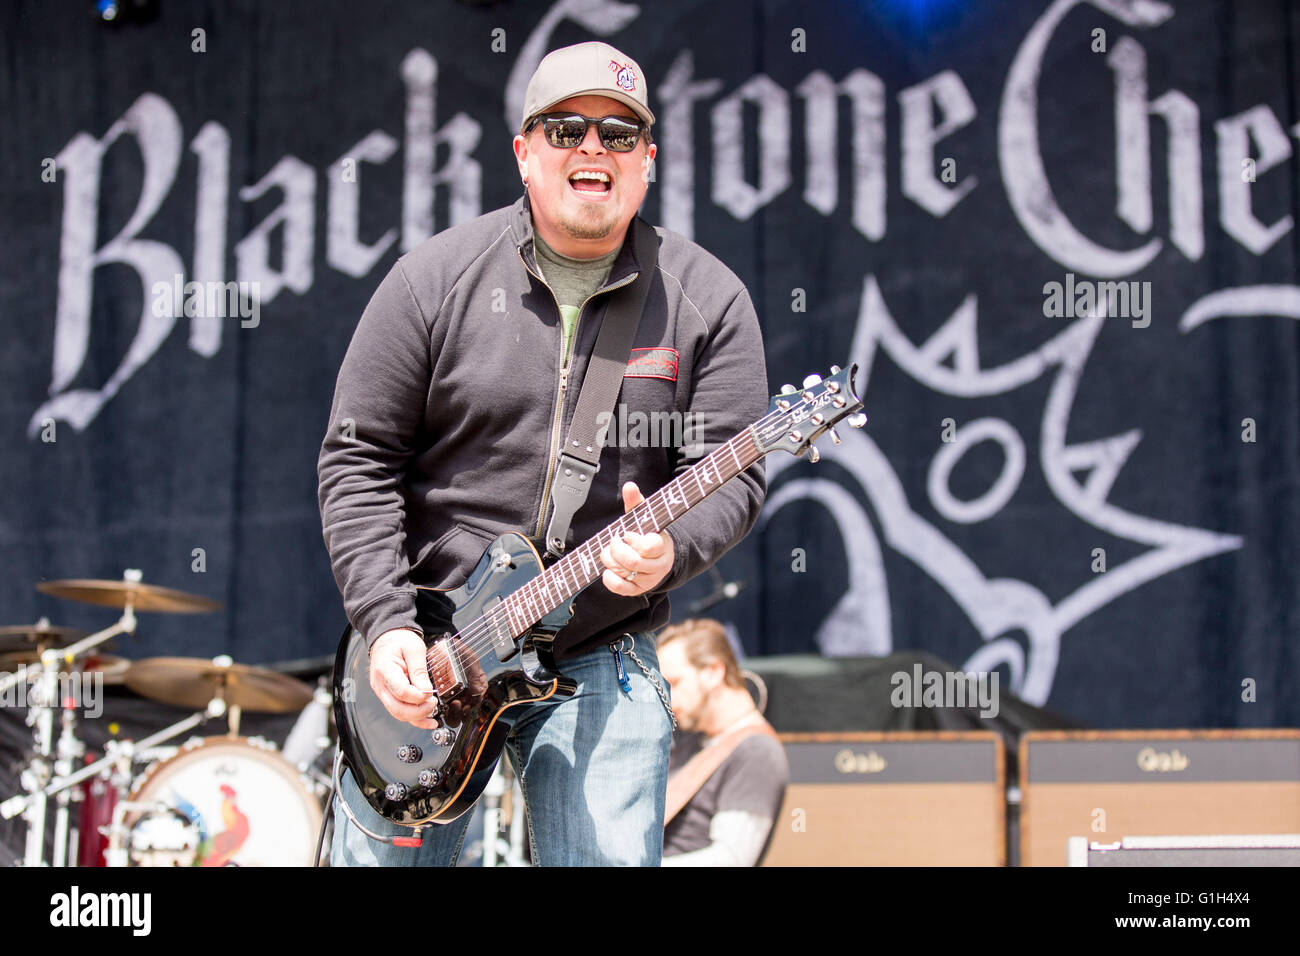 Somerset, Wisconsin, USA. 14th May, 2016. Musician CHRIS ROBERTSON of Black Stone Cherry performs live at Somerset Amphitheater during the Northern Invasion Music Festival in Somerset, Wisconsin © Daniel DeSlover/ZUMA Wire/Alamy Live News Stock Photo